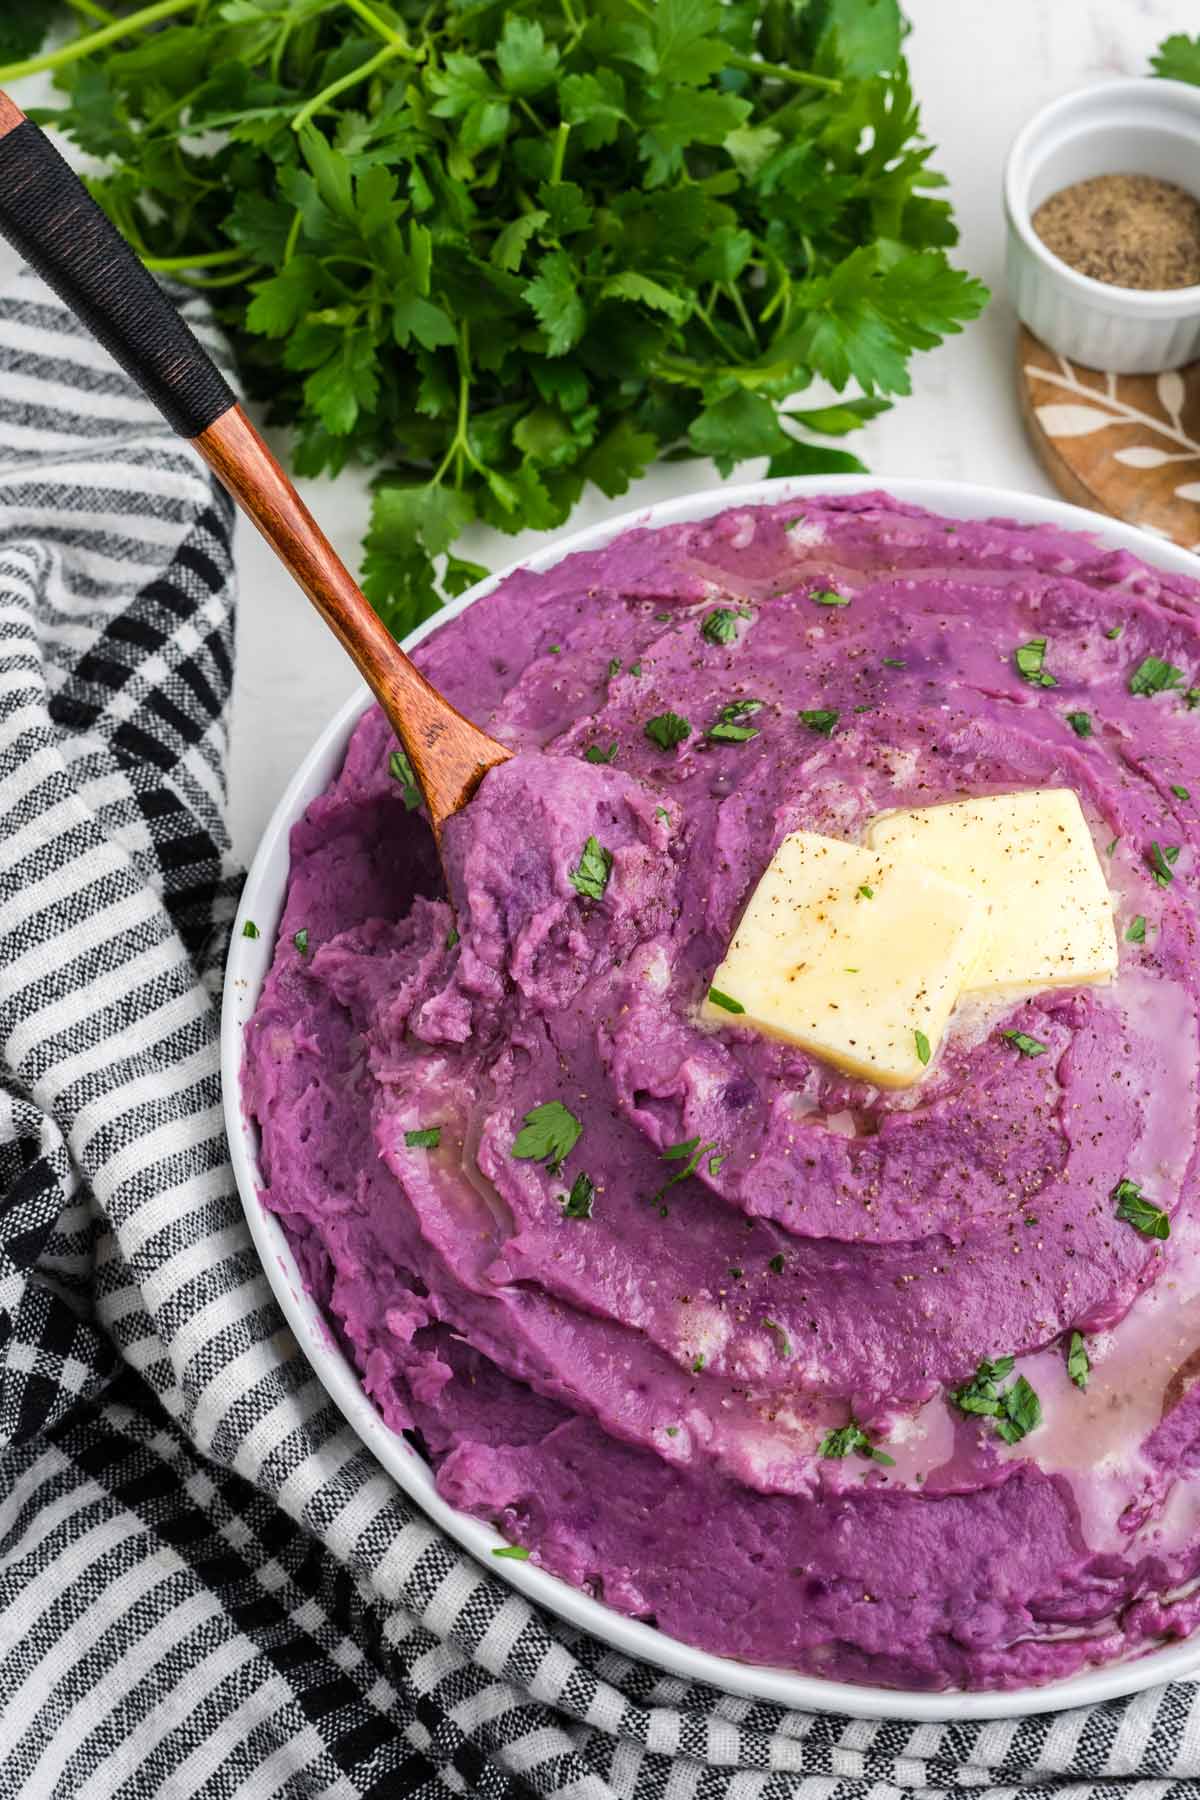 A bowl of mashed purple potatoes on the table with a spoon in the bowl.